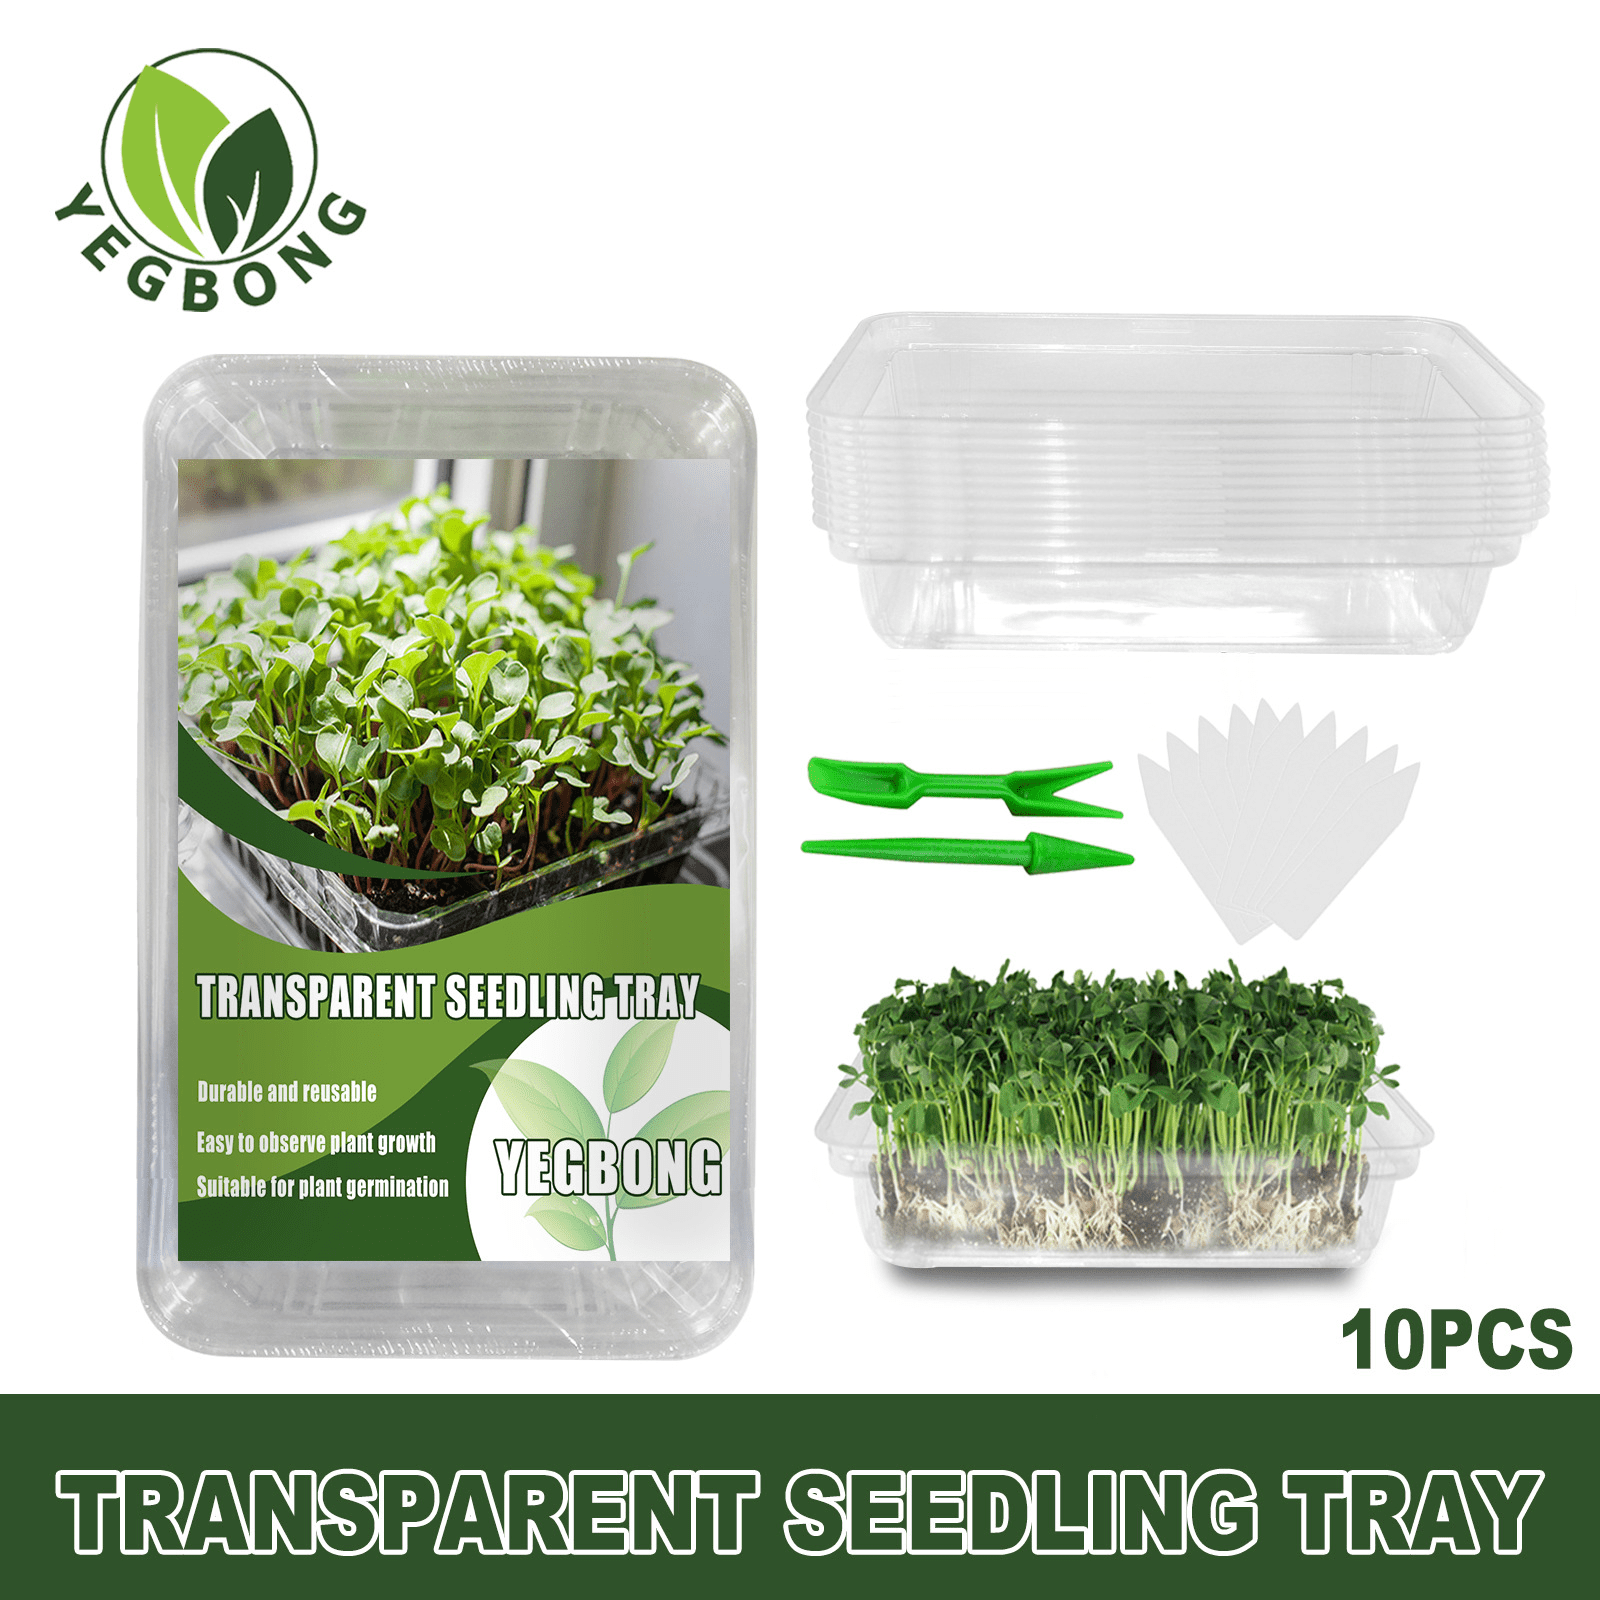 LARGE 3 TRAYS SPROUTER GERMINATION 3 LEVEL FREE SEEDS 